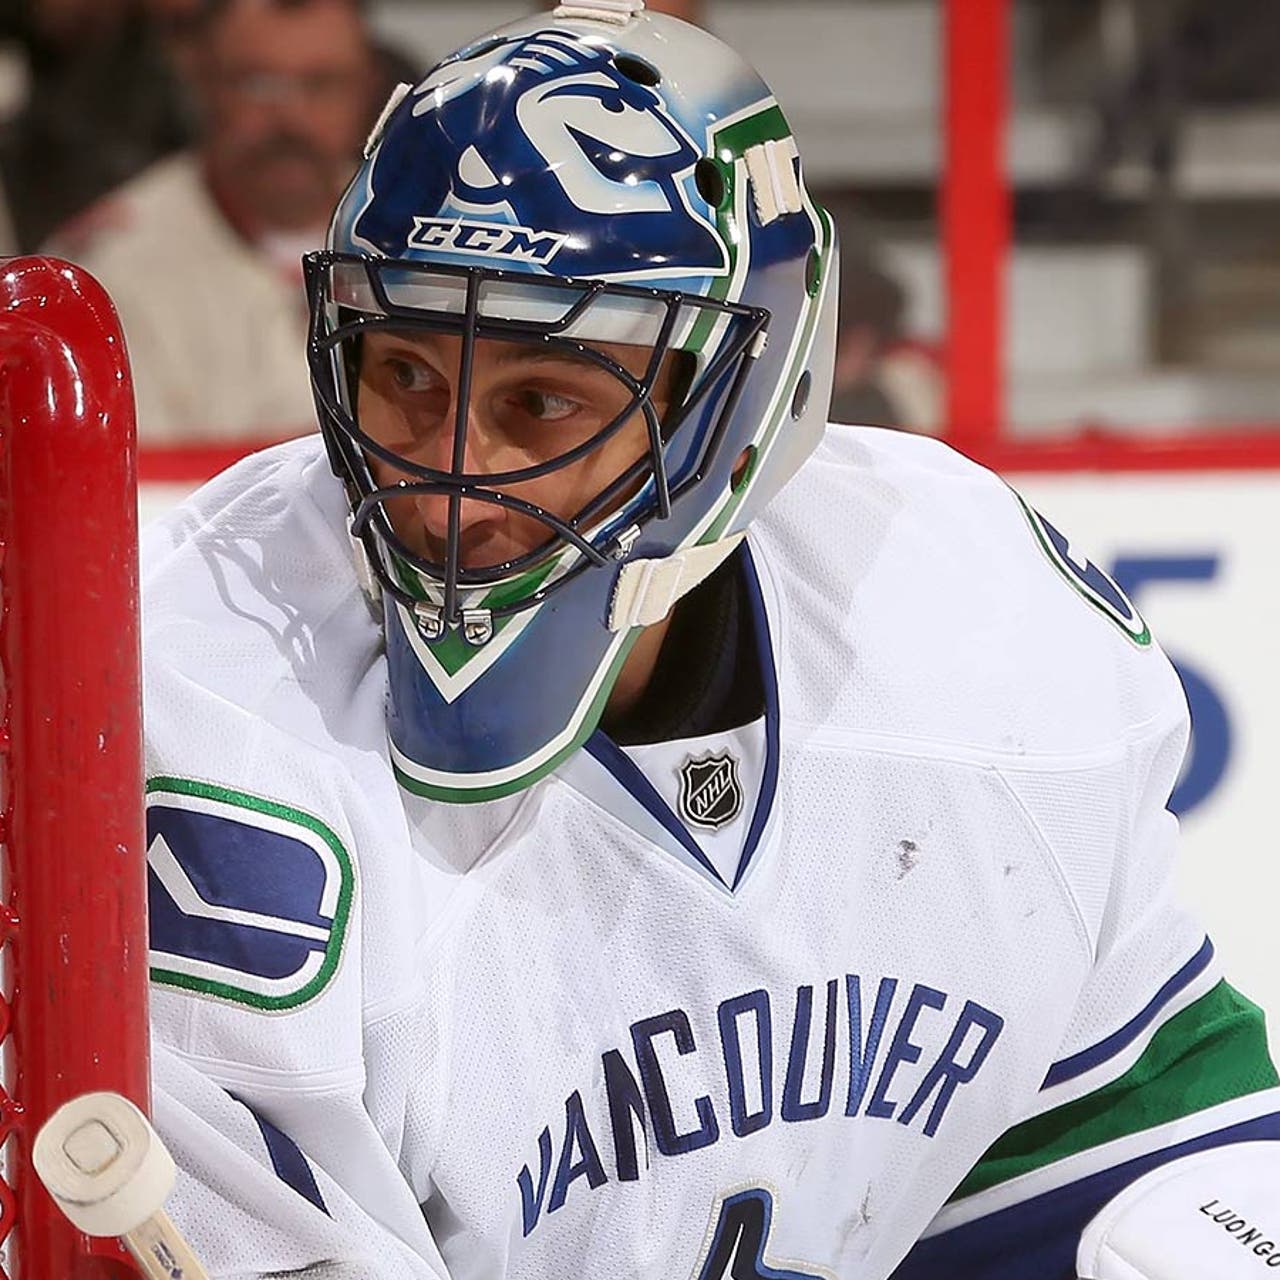 Roberto Luongo is still not over getting benched for a 2014